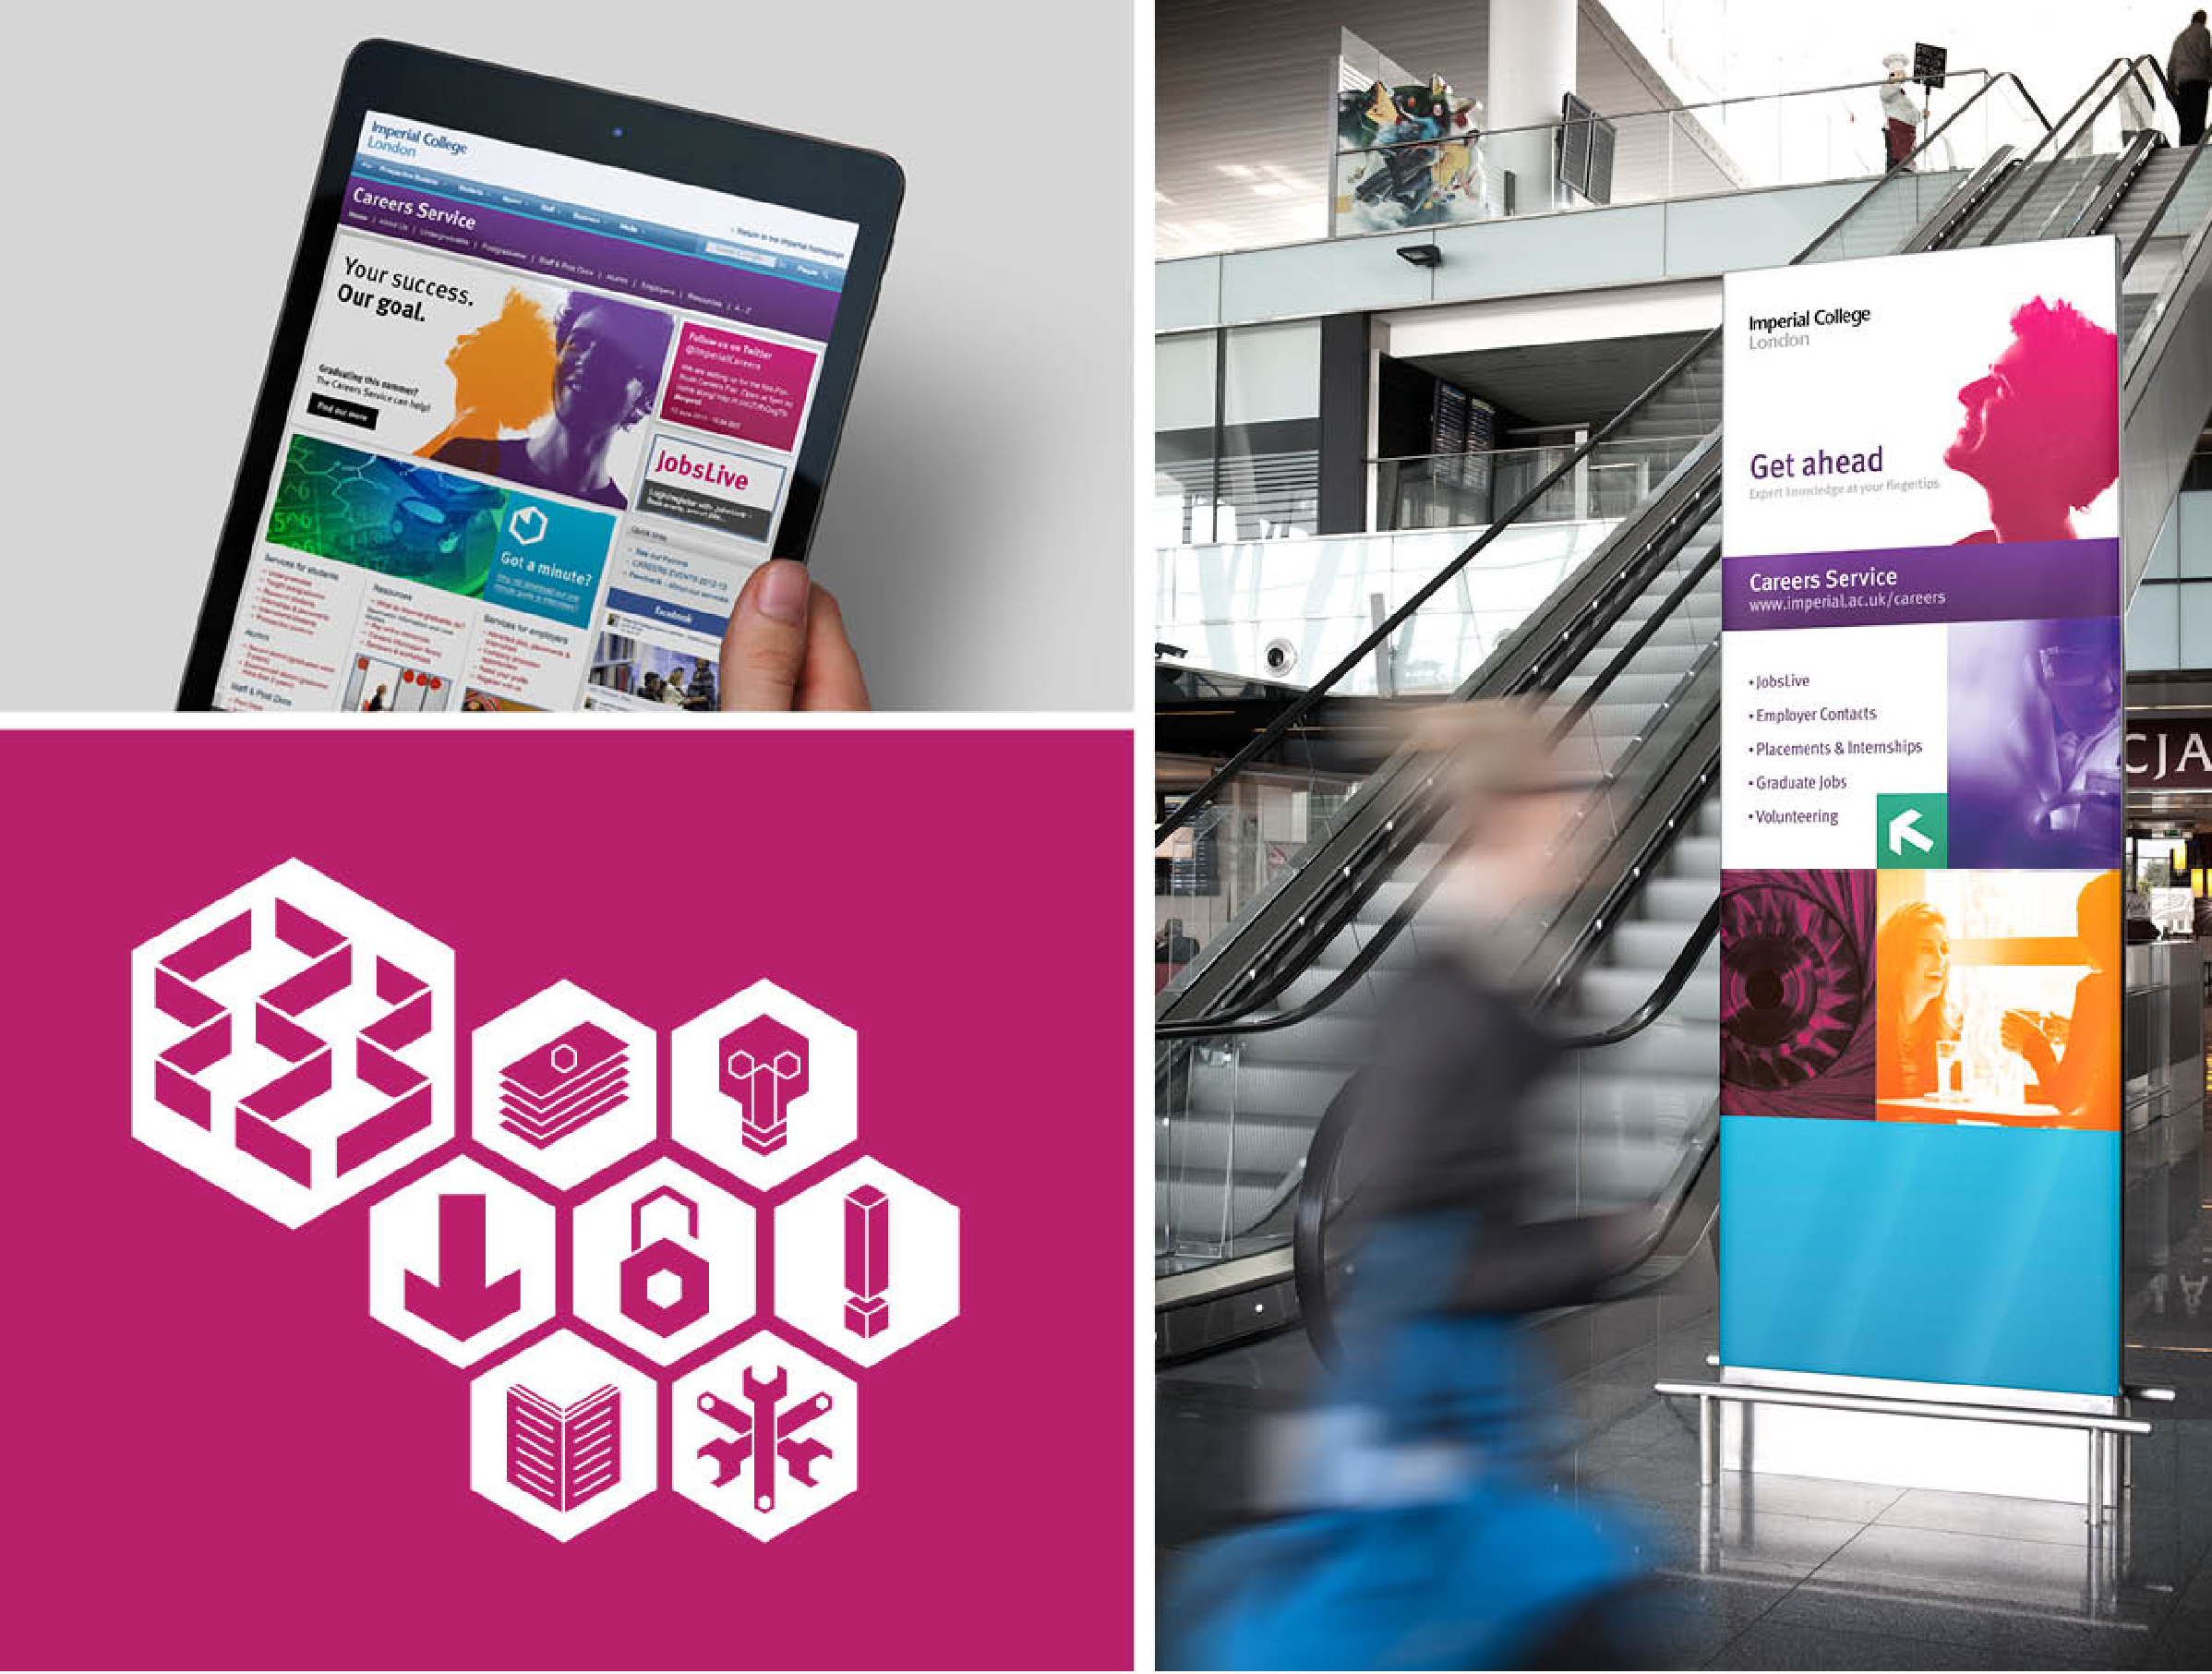 Imperial College London branding on website and banner stand